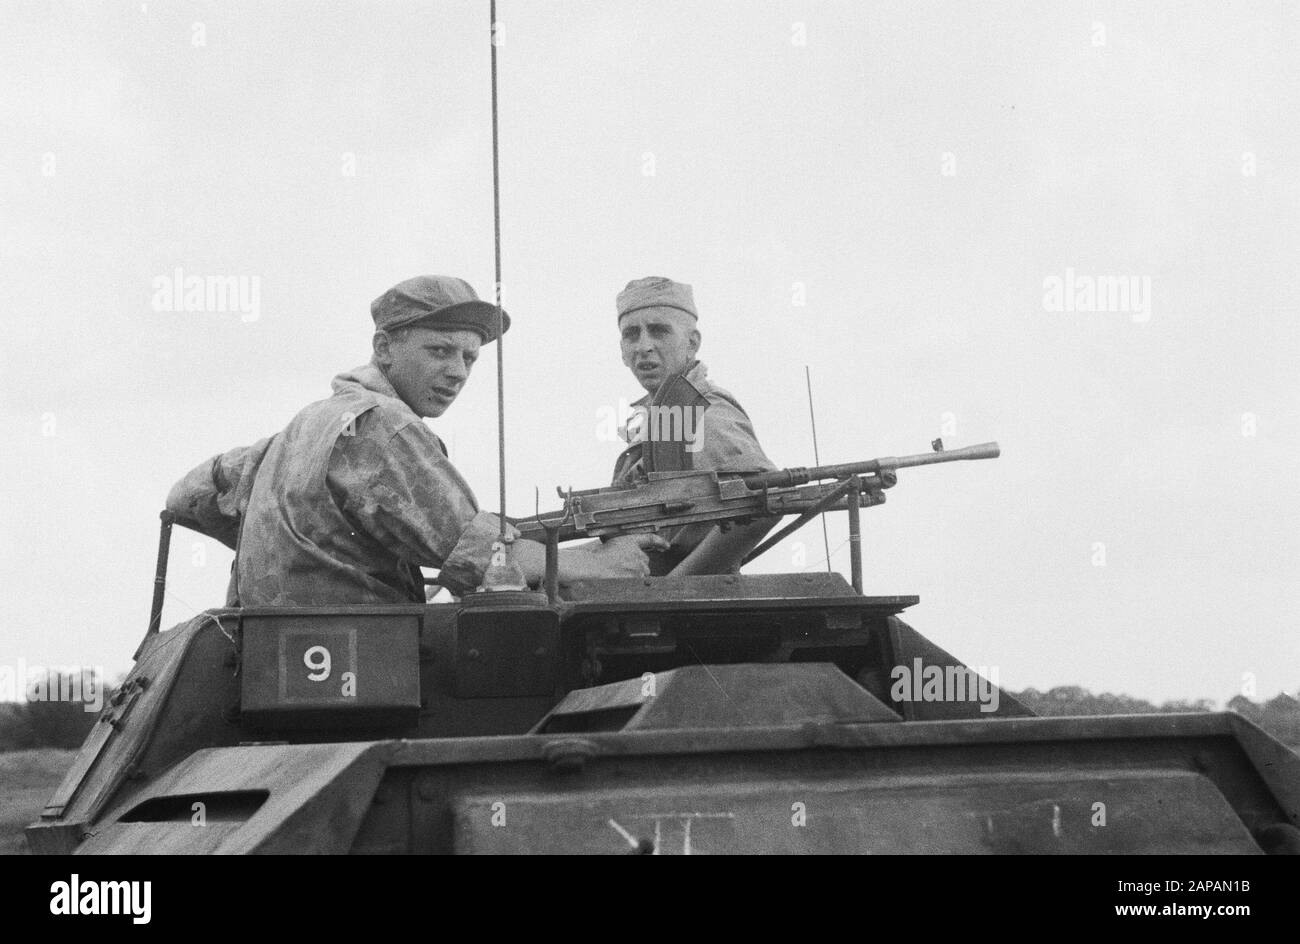 Loeboek Pakem and Baoengan Description: The first armored cars snatch into Pematang Siantar. Brenschutter and commander of Scoutcar Date: 29 July 1948 Location: Indonesia, Dutch East Indies, Sumatra Stock Photo